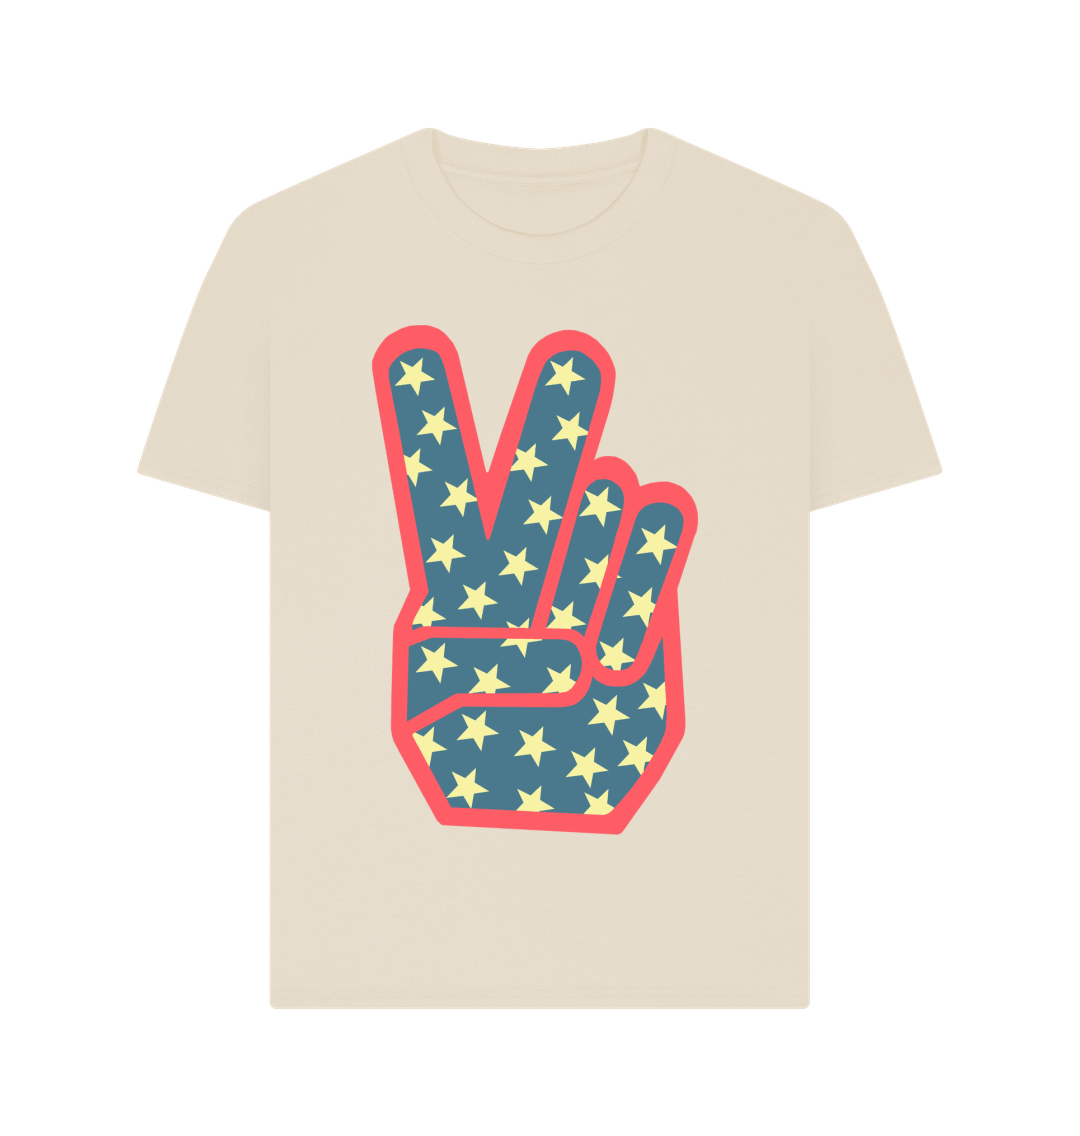 Oat PEACE SIGN OFF WHITE T-SHIRT